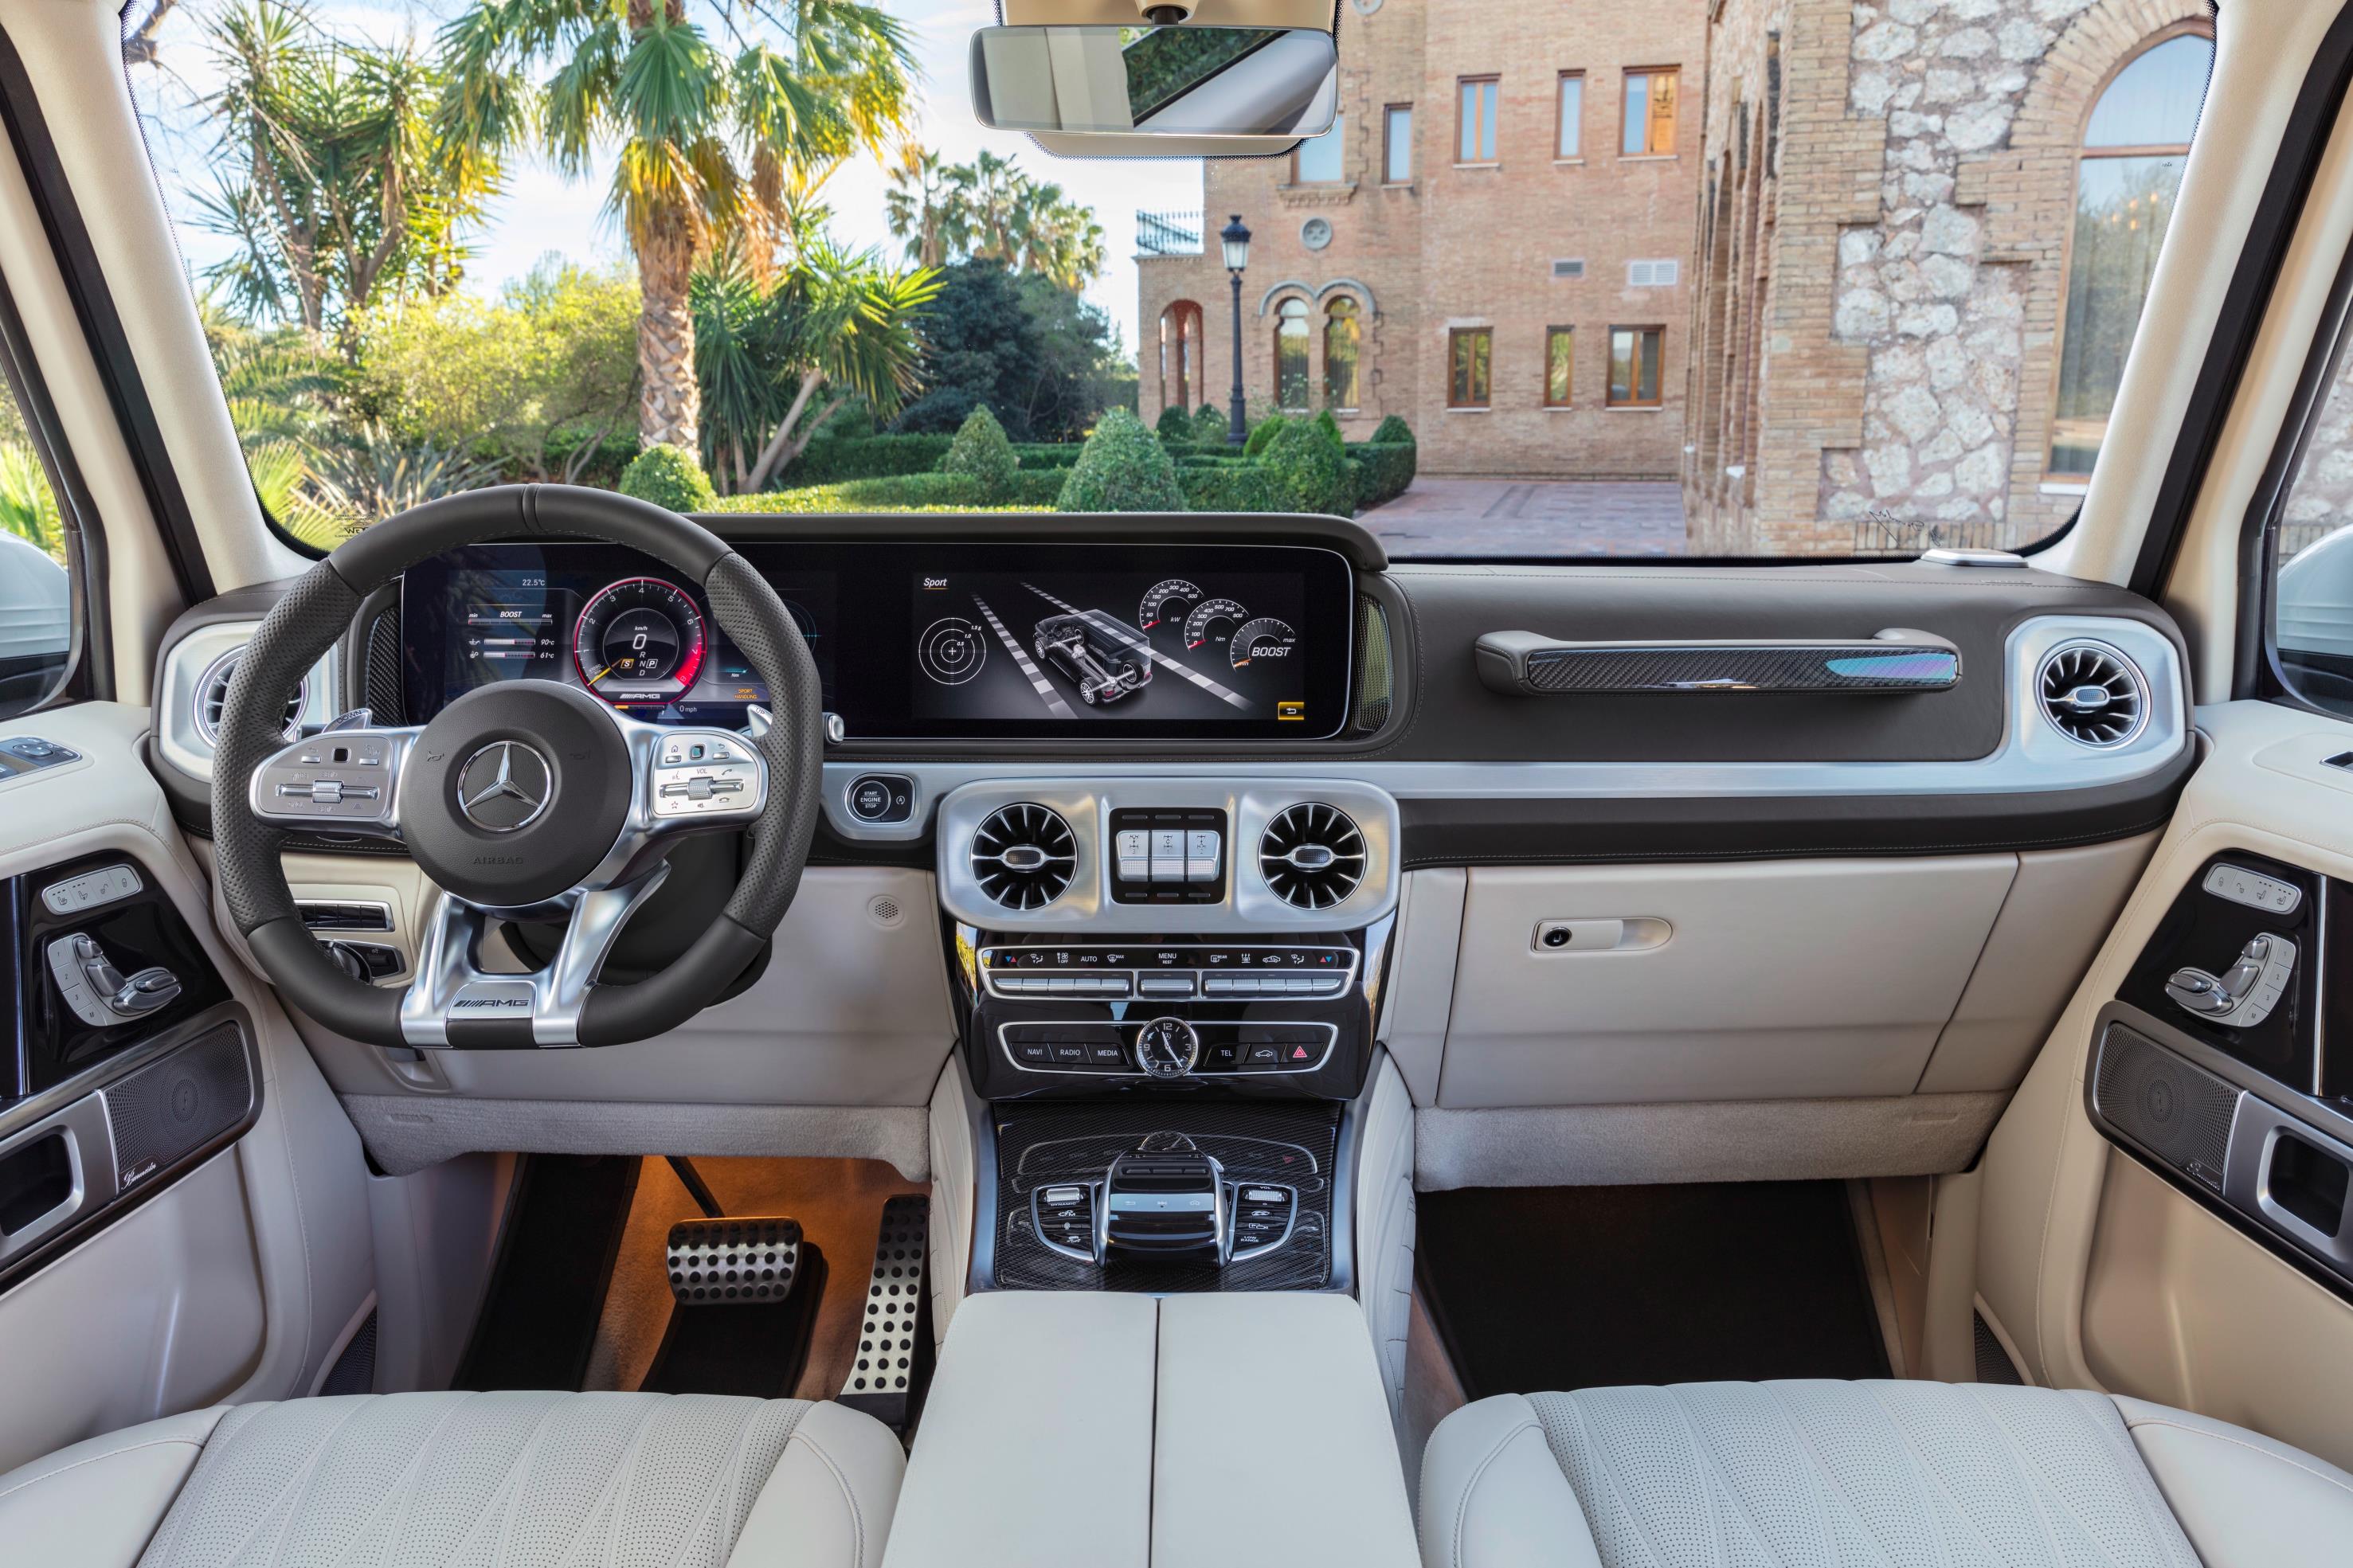 2019 Mercedes-AMG G 63 on sale in Australia from $247,700 